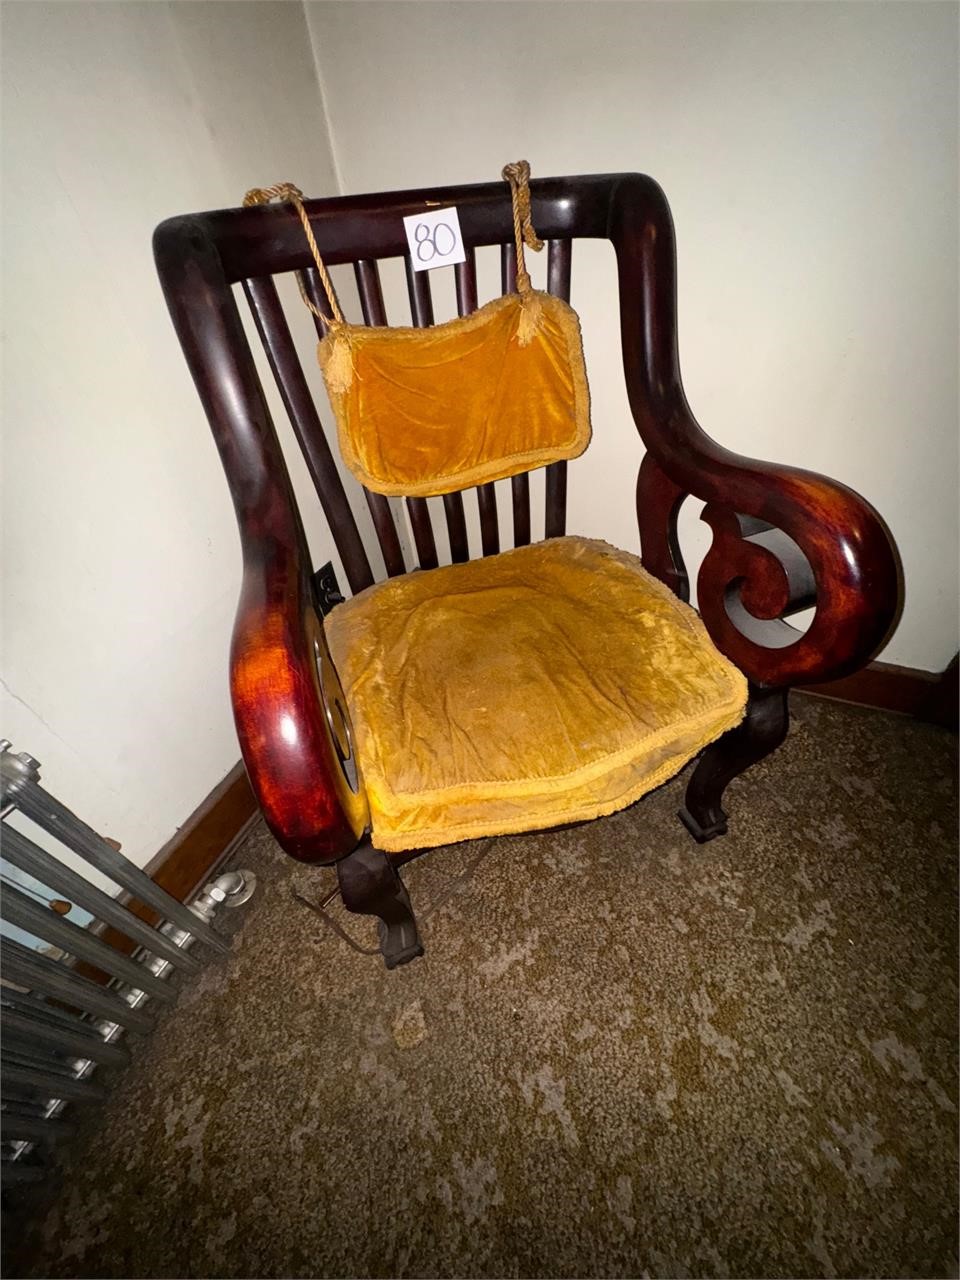 Very nice antique chair